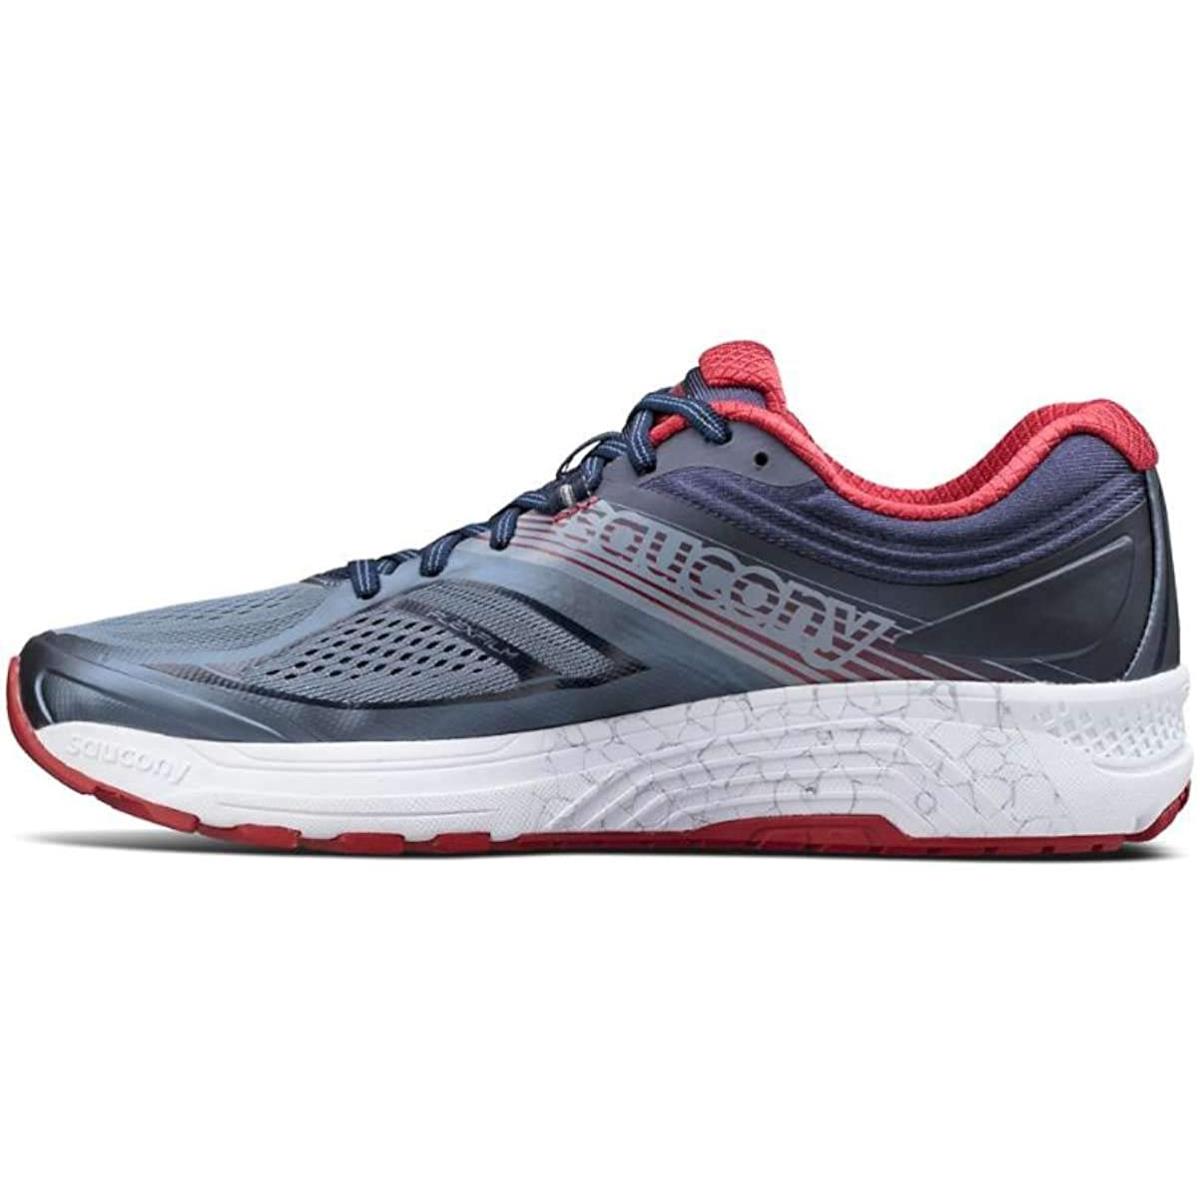 Saucony Men`s Guide 10 Running Shoes Navy/Red